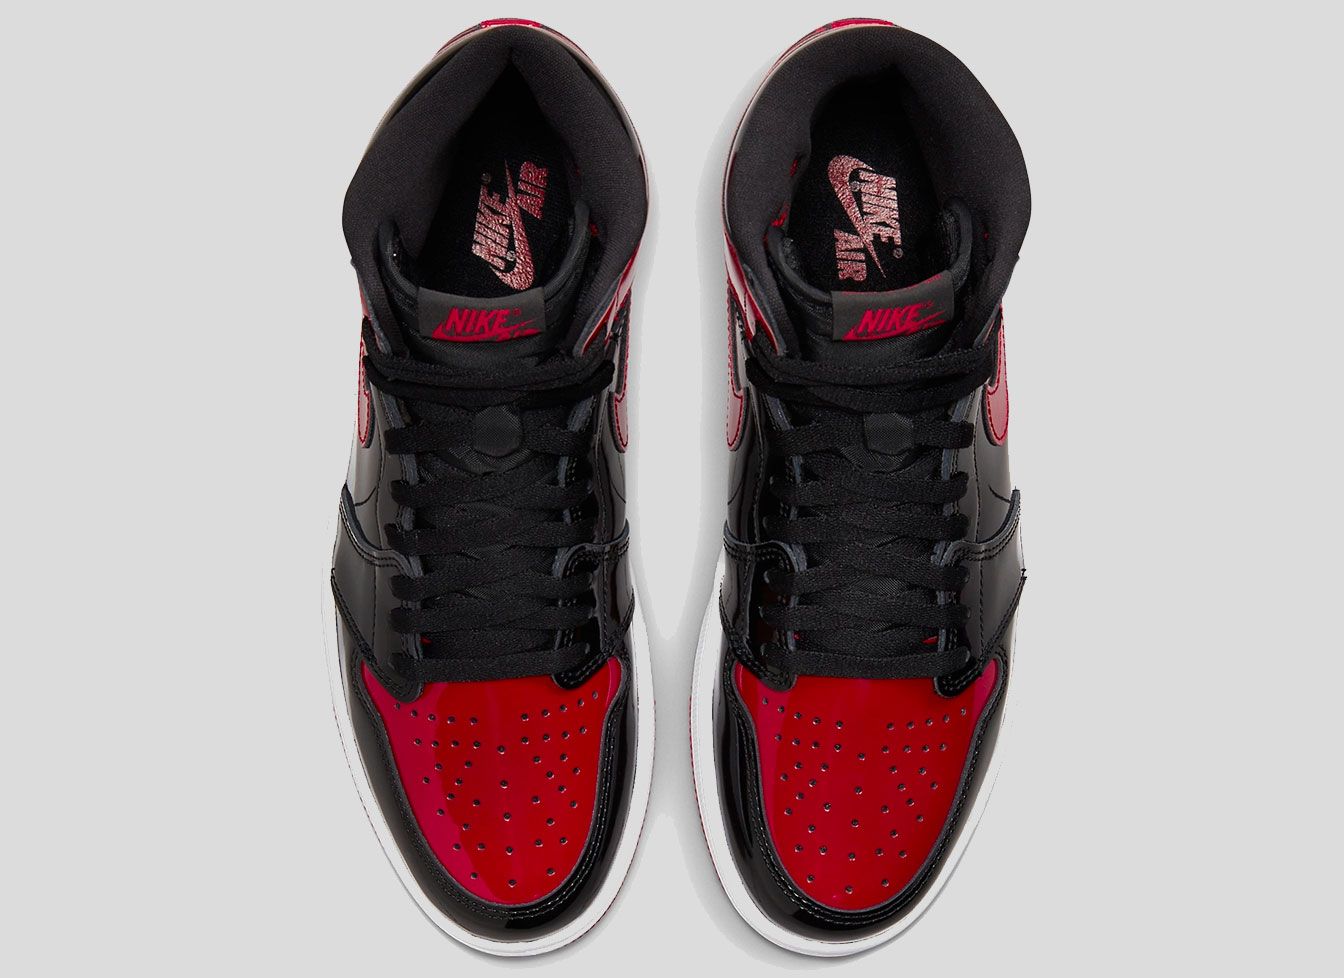 Air Jordan 1 in a patent leather black and red colourway.